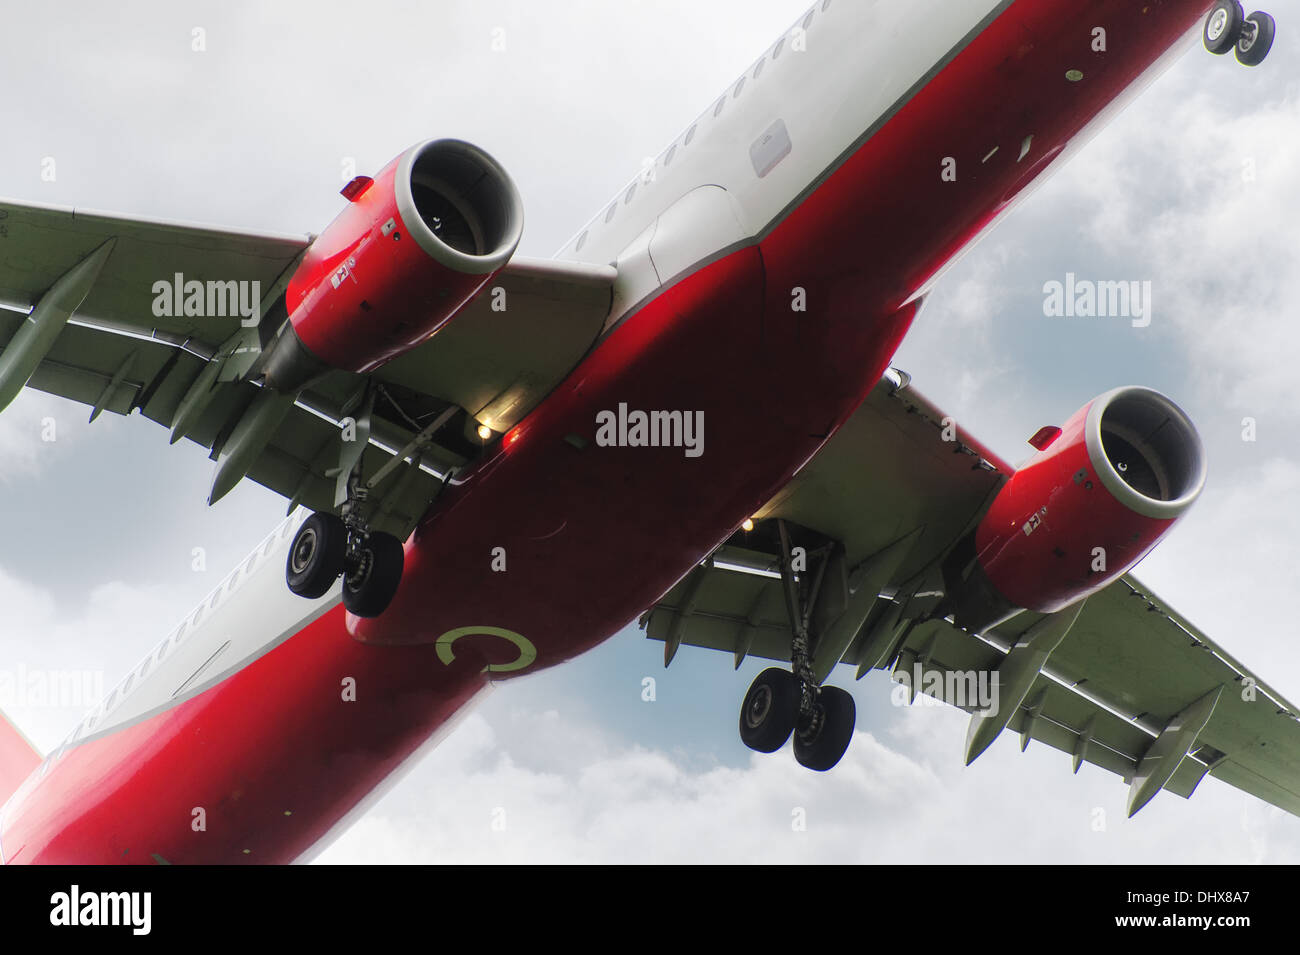 Close up of a passenger jet fly-over Banque D'Images